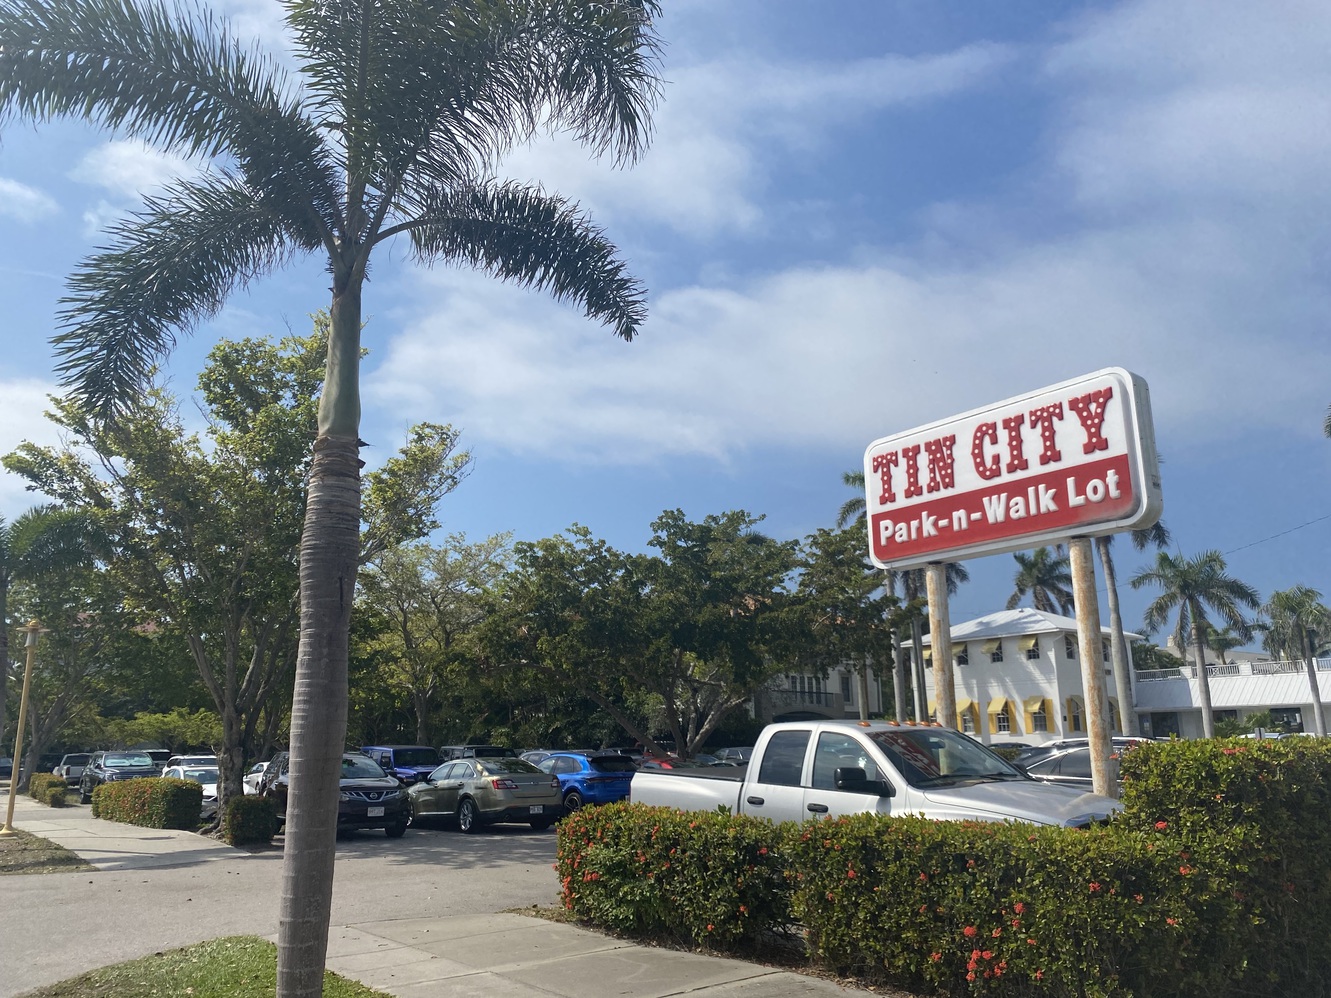 This is the park & walk lot for Tin City in Naples,
      Florida.